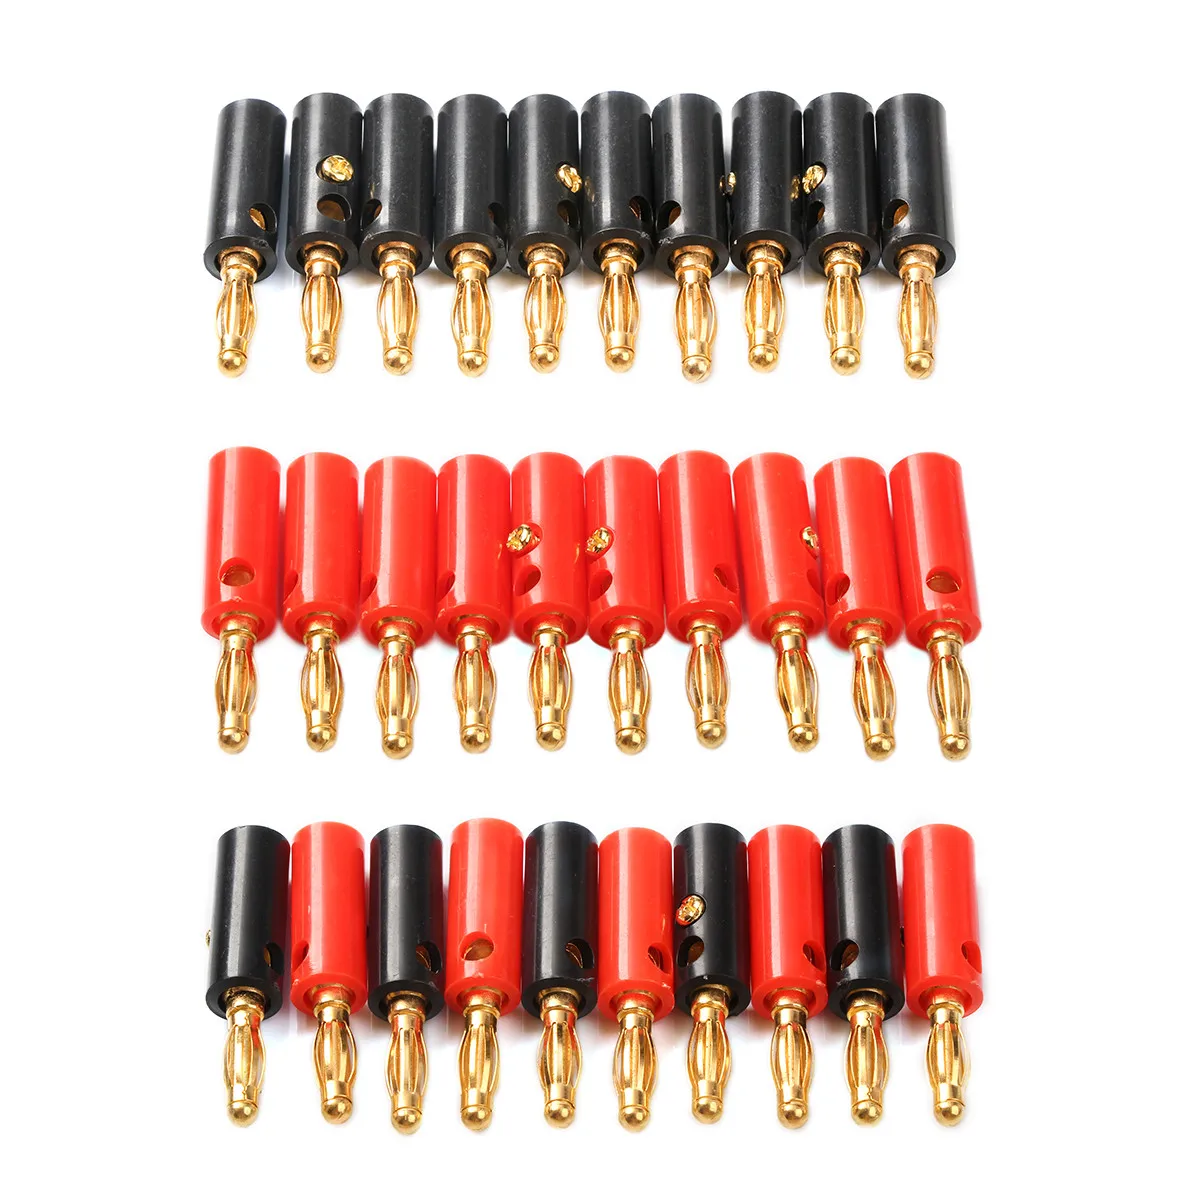 

20PC Black&Red 4mm Banana Plug Gold Plated Audio Speaker Cable Wire Connectors Banana Connector Adapter set